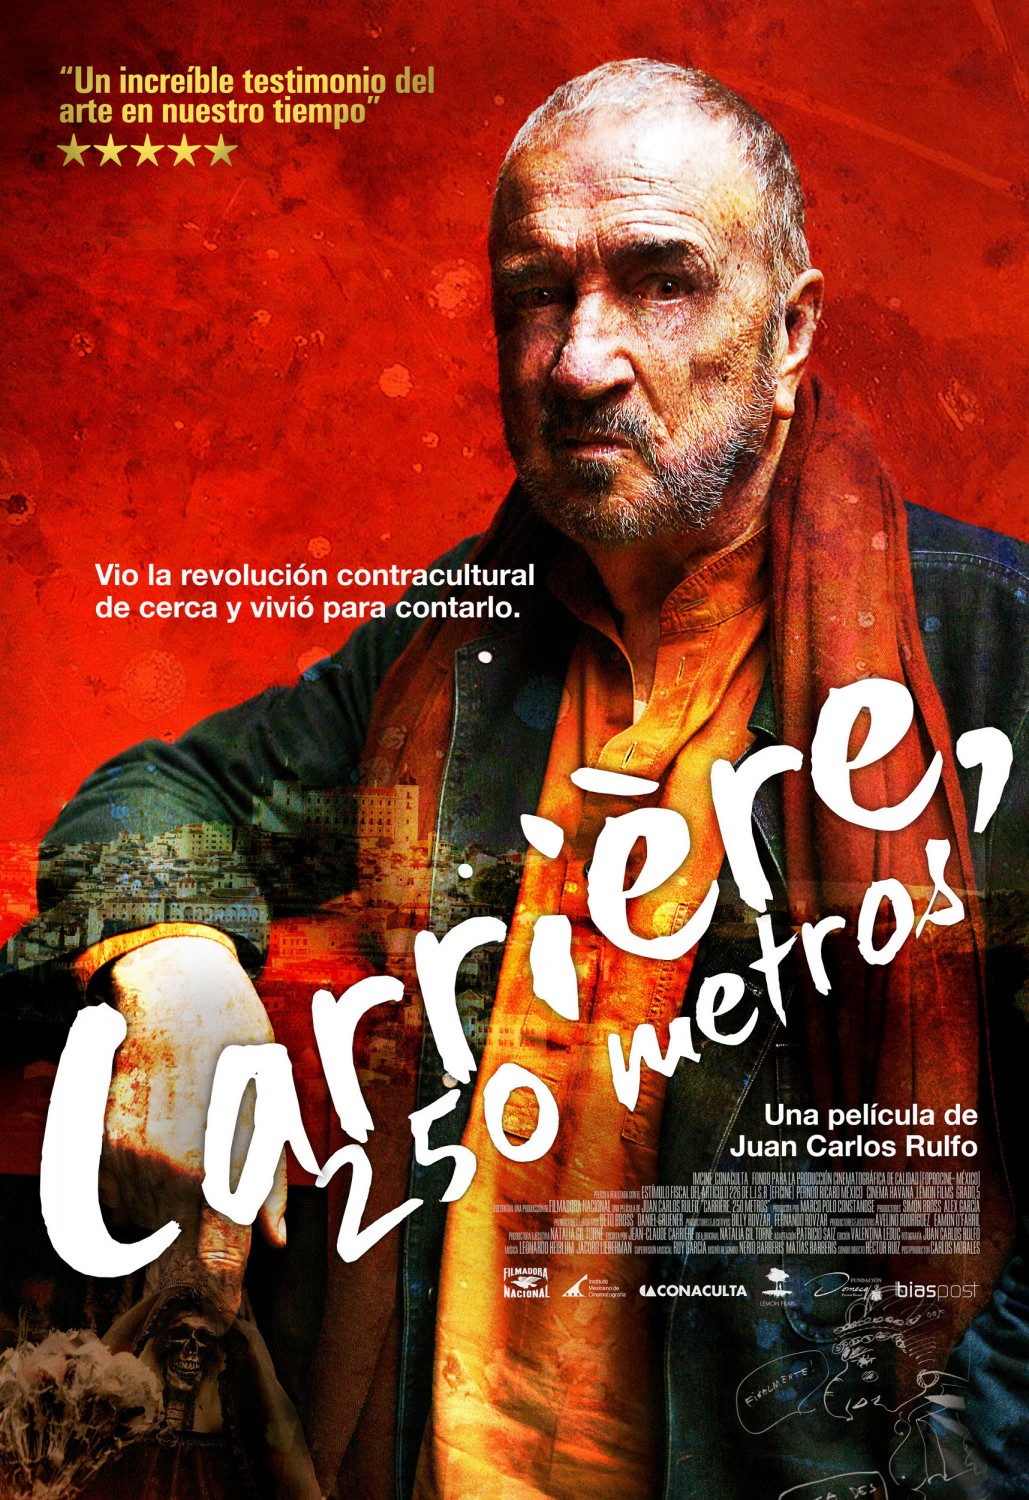 Extra Large Movie Poster Image for Carrière, 250 metros 